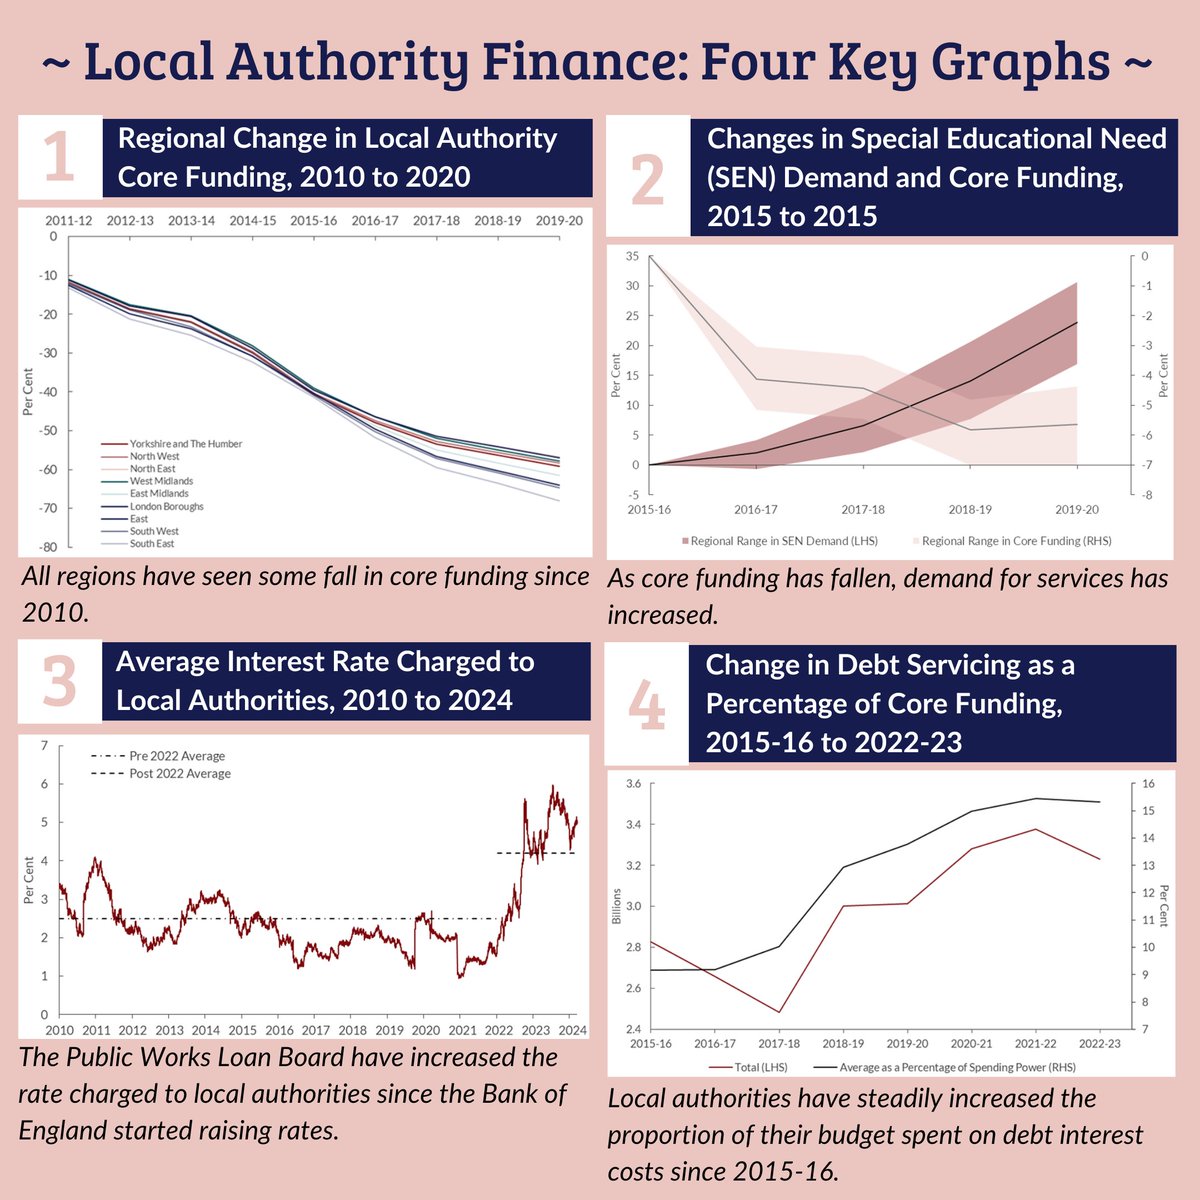 ⚡️ NEW RESEARCH ⚡️ Our latest briefing by @_maxmosley unpacks the topic of local authority finance 💡 including the consequences of reduced #funding, increased service demand, growing #debt costs and higher #interest rates Read more here🔓⬇️ niesr.ac.uk/publications/l…